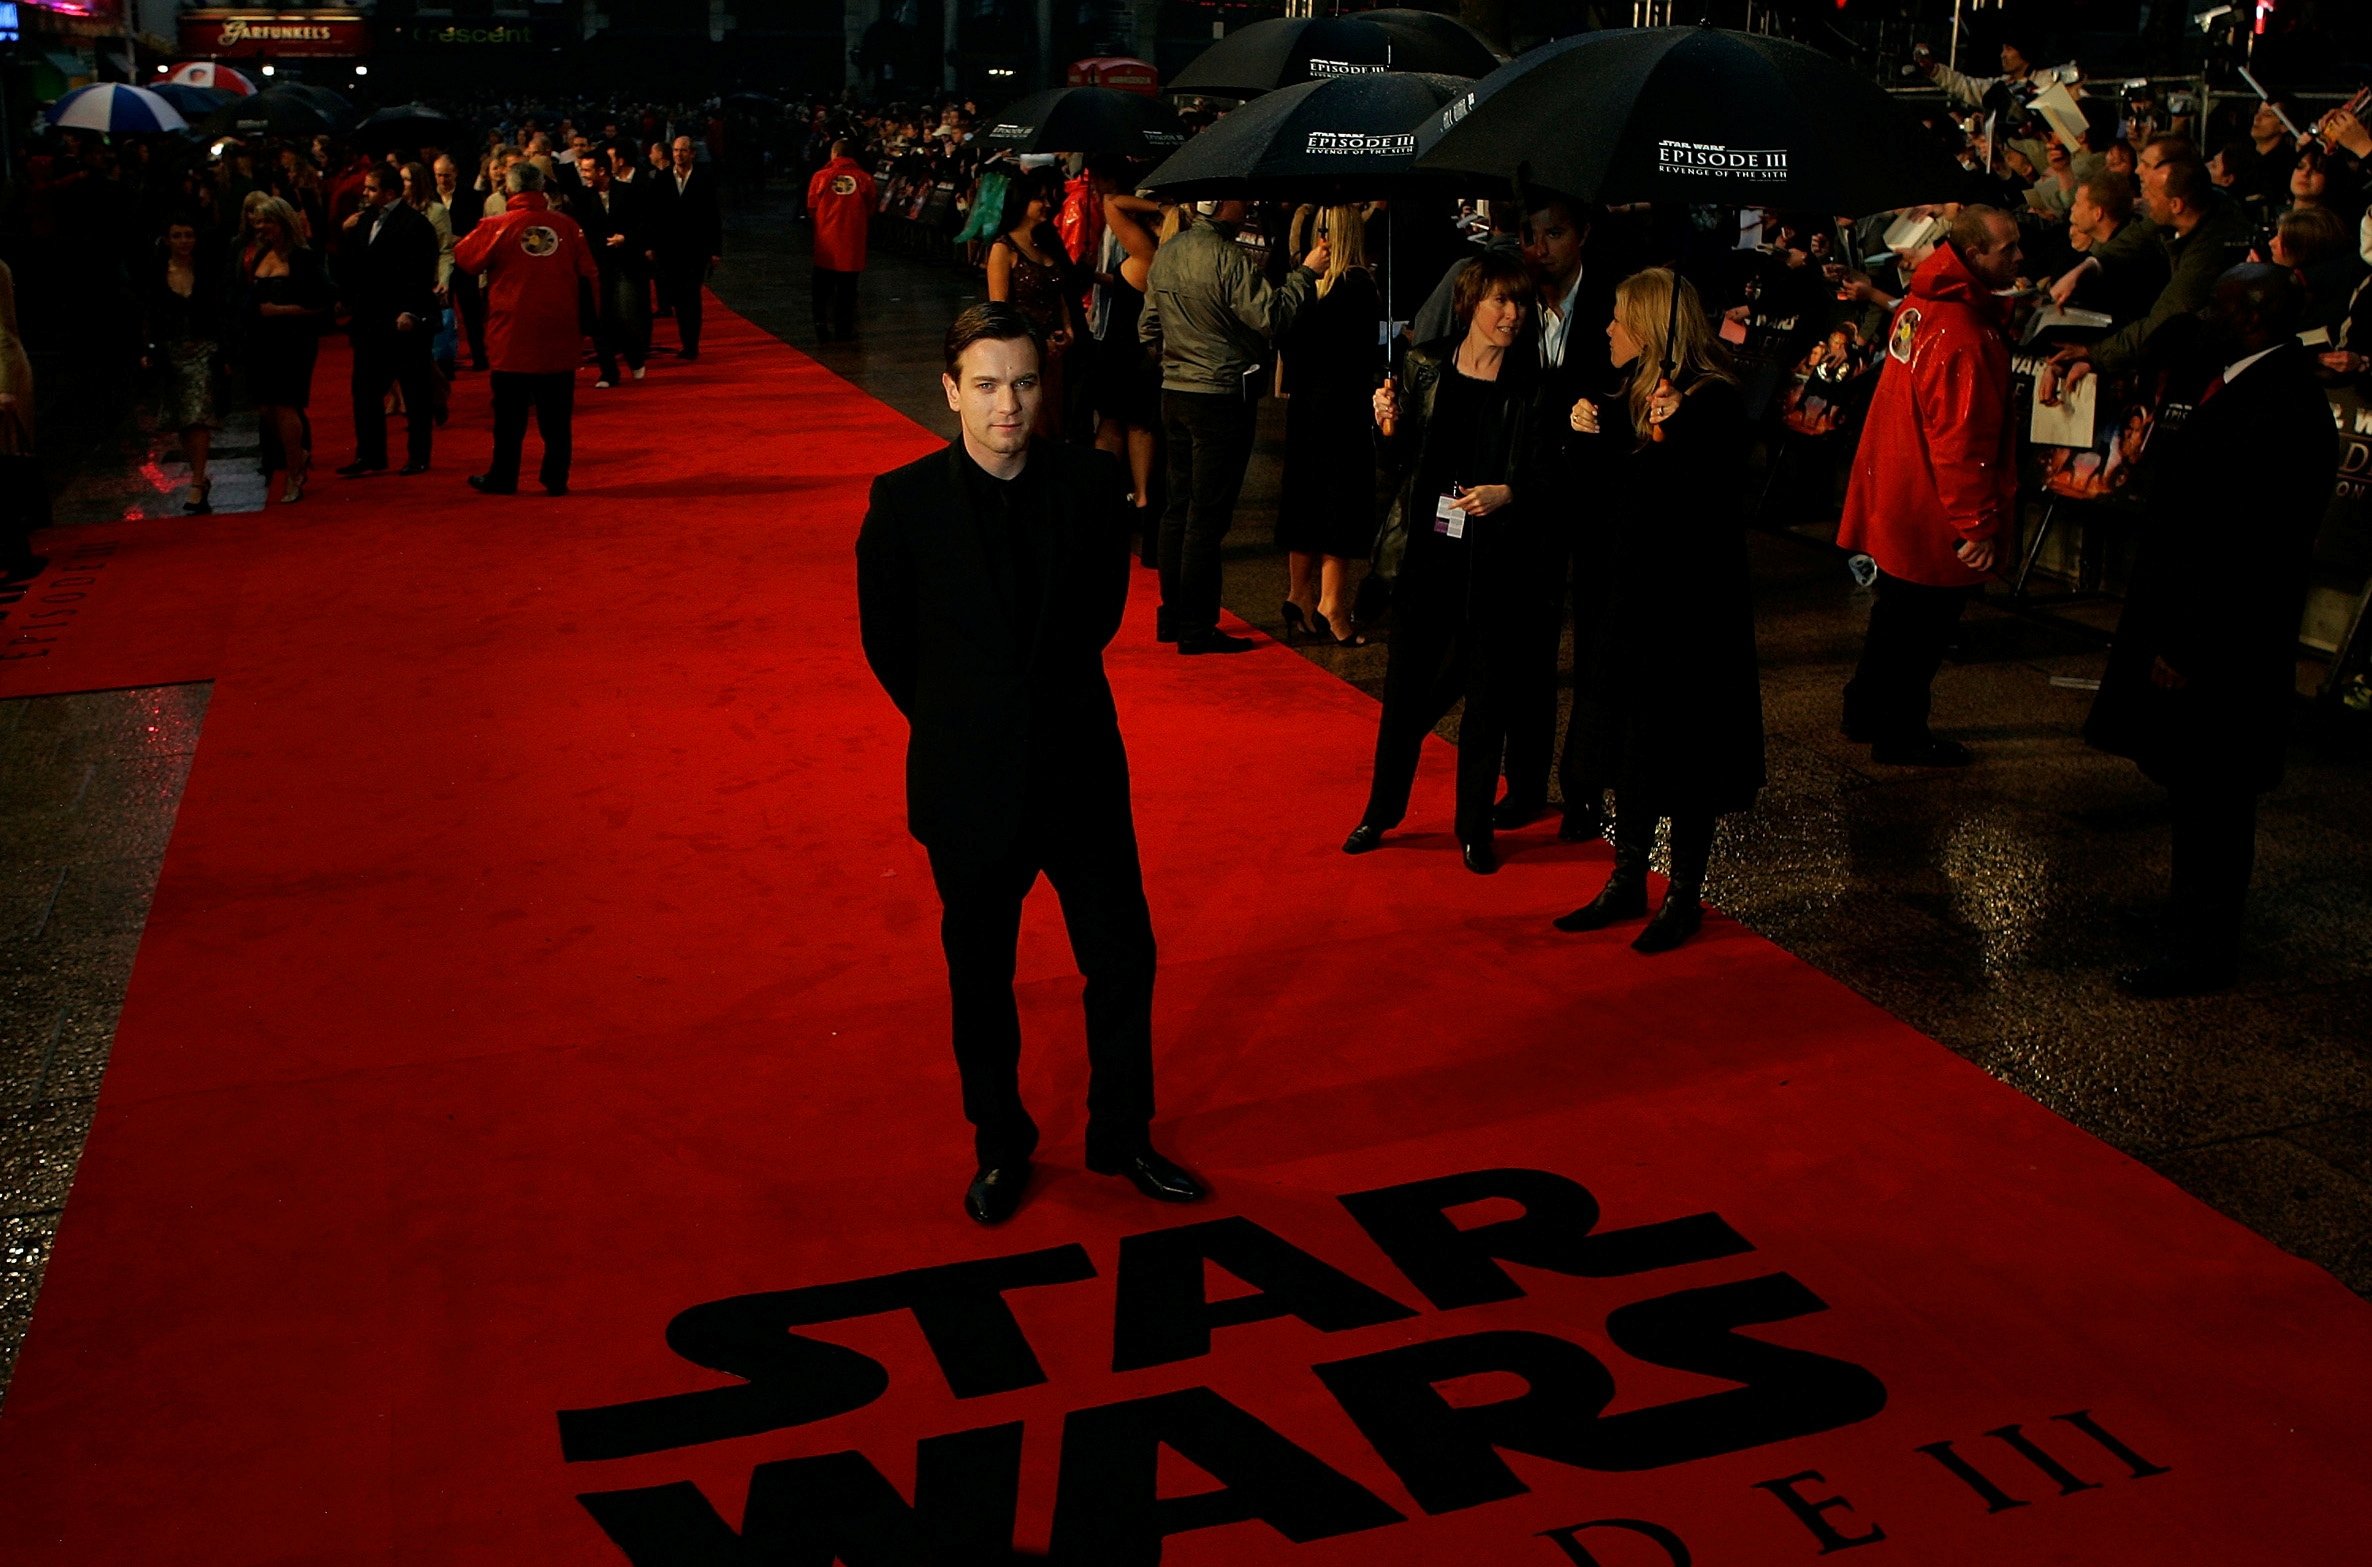 British actor Ewan McGregor poses as he arrives for the U.K. premiere of the 'Star Wars' film 'Revenge of the Sith' in London's Leicester Square, May 16, 2005. (Reuters Photo)